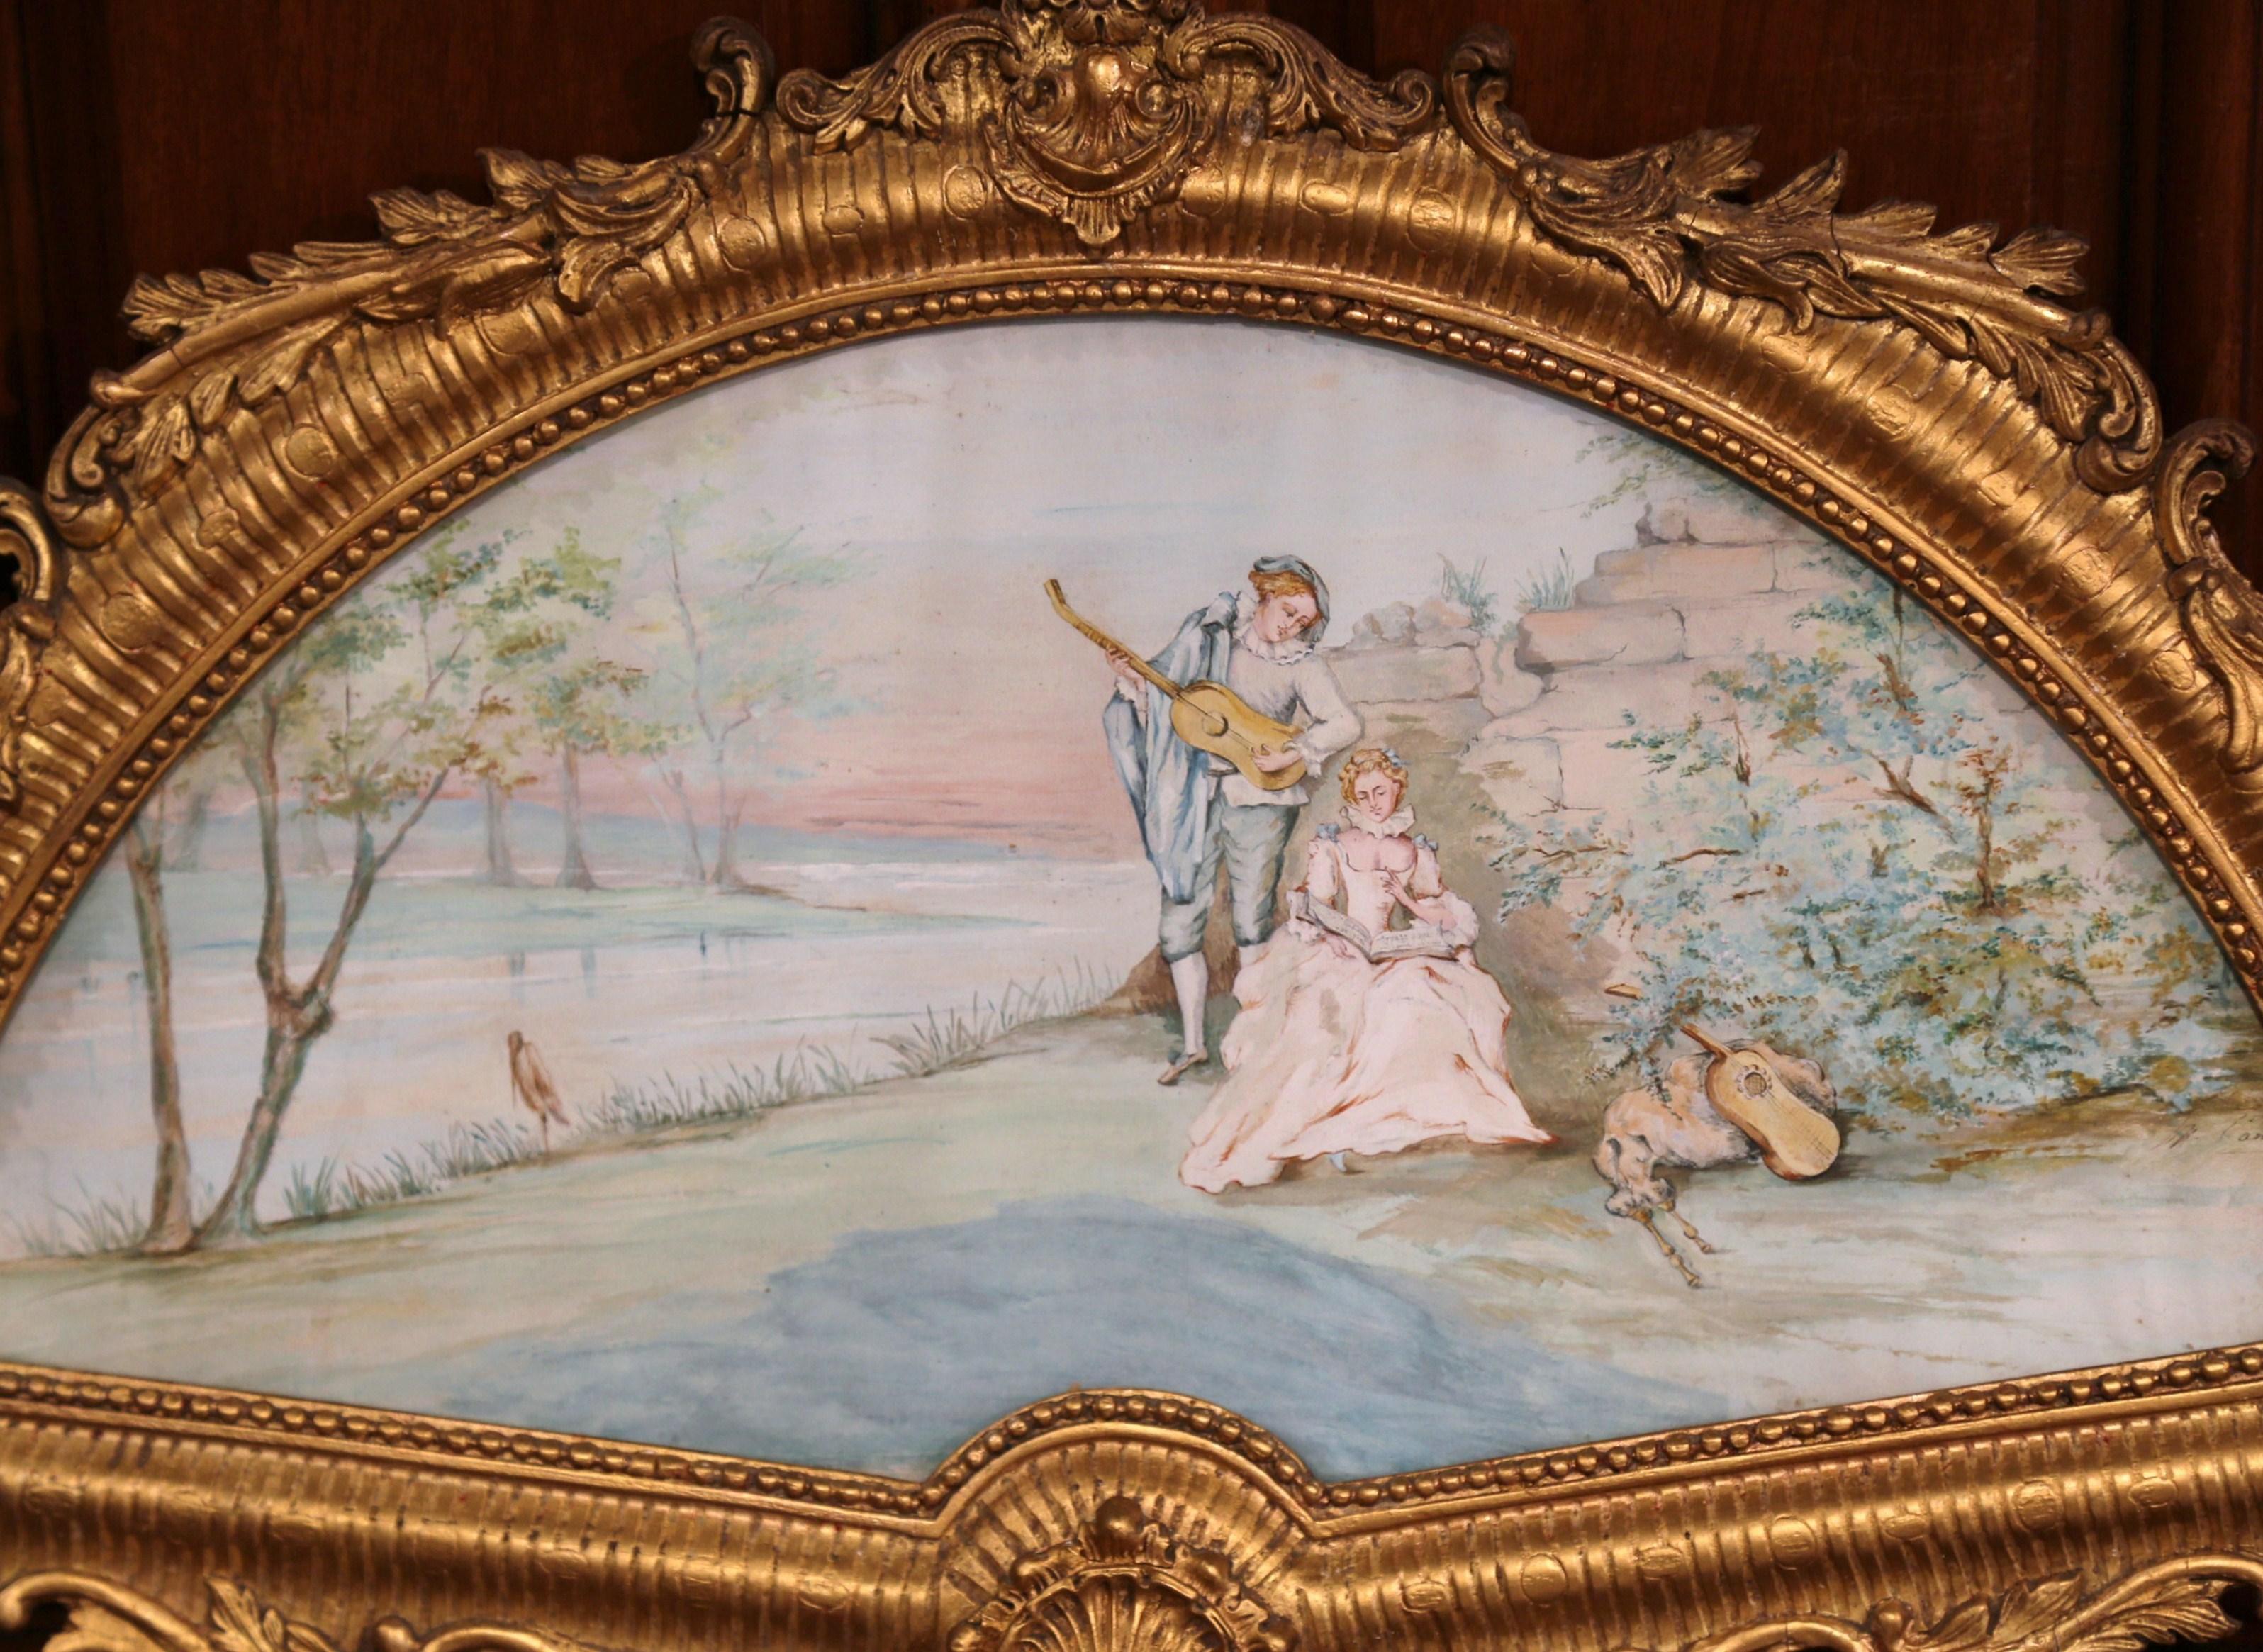 Shaped as a fan, this antique painting would make a unique addition to a powder room, or gallery wall hanging. Created in Paris, France, circa 1870, the elegant, decorative wall piece features a romantic, courtly scene with a gentleman playing a